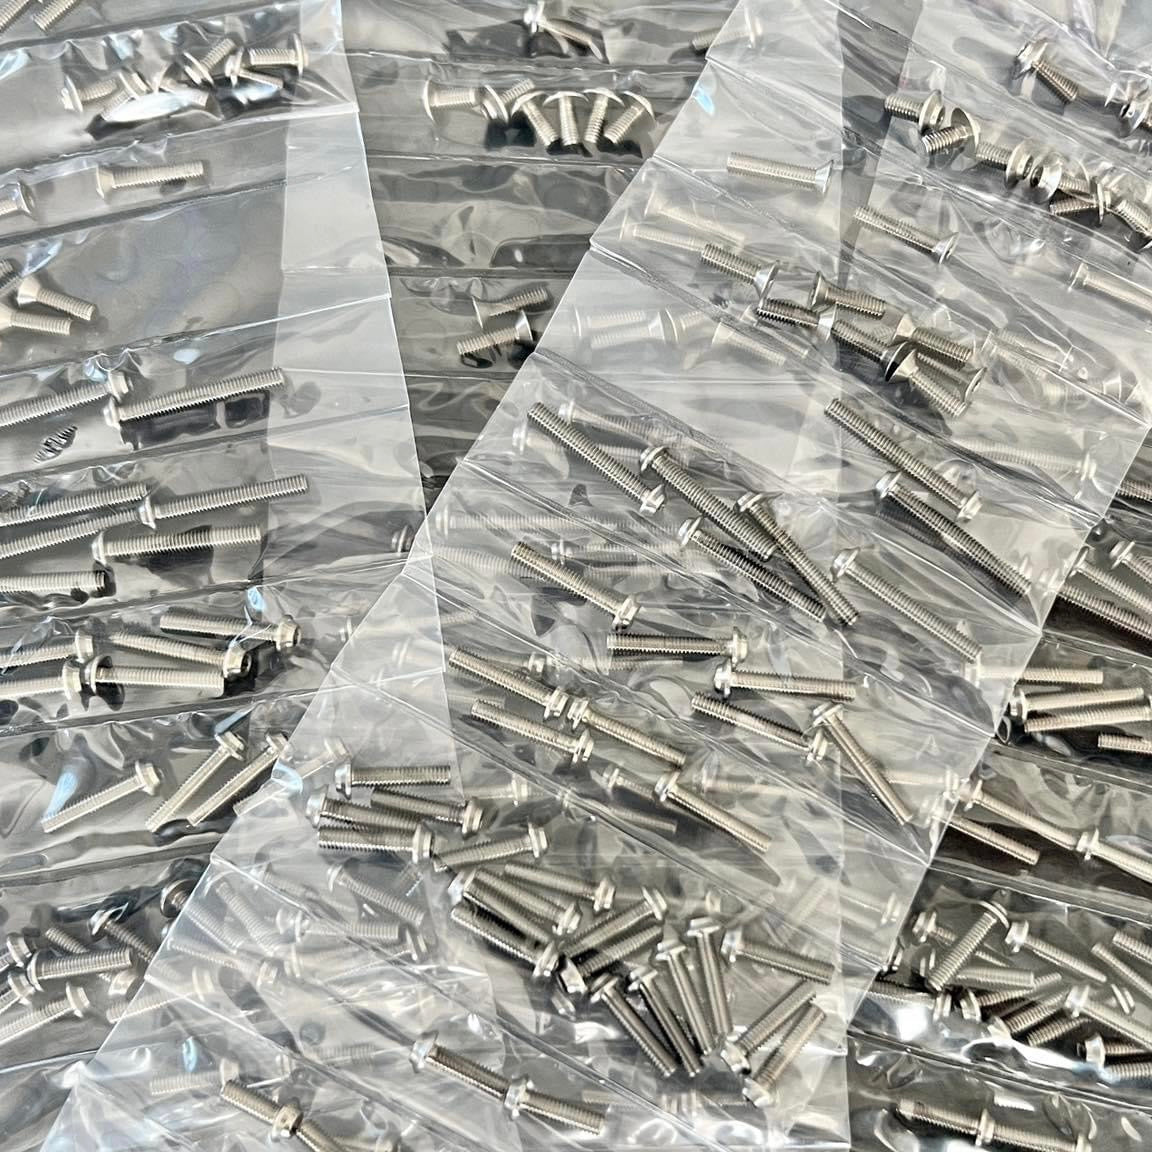 Pro Duty Screws Coming back in Stock this week